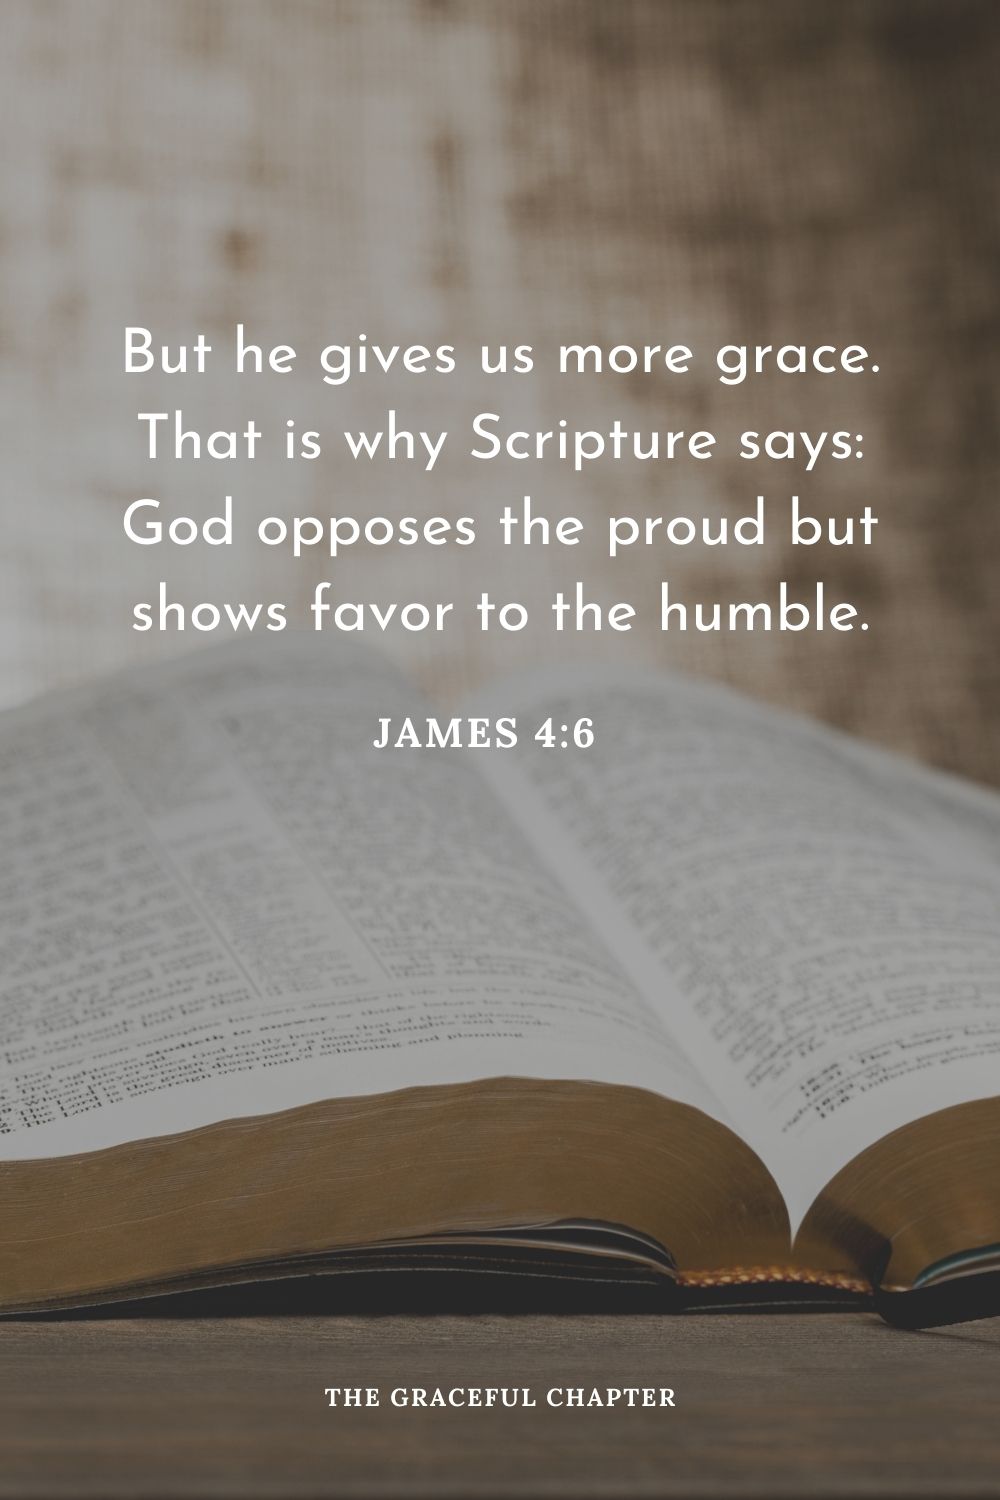 But he gives us more grace. That is why Scripture says: God opposes the proud but shows favor to the humble.